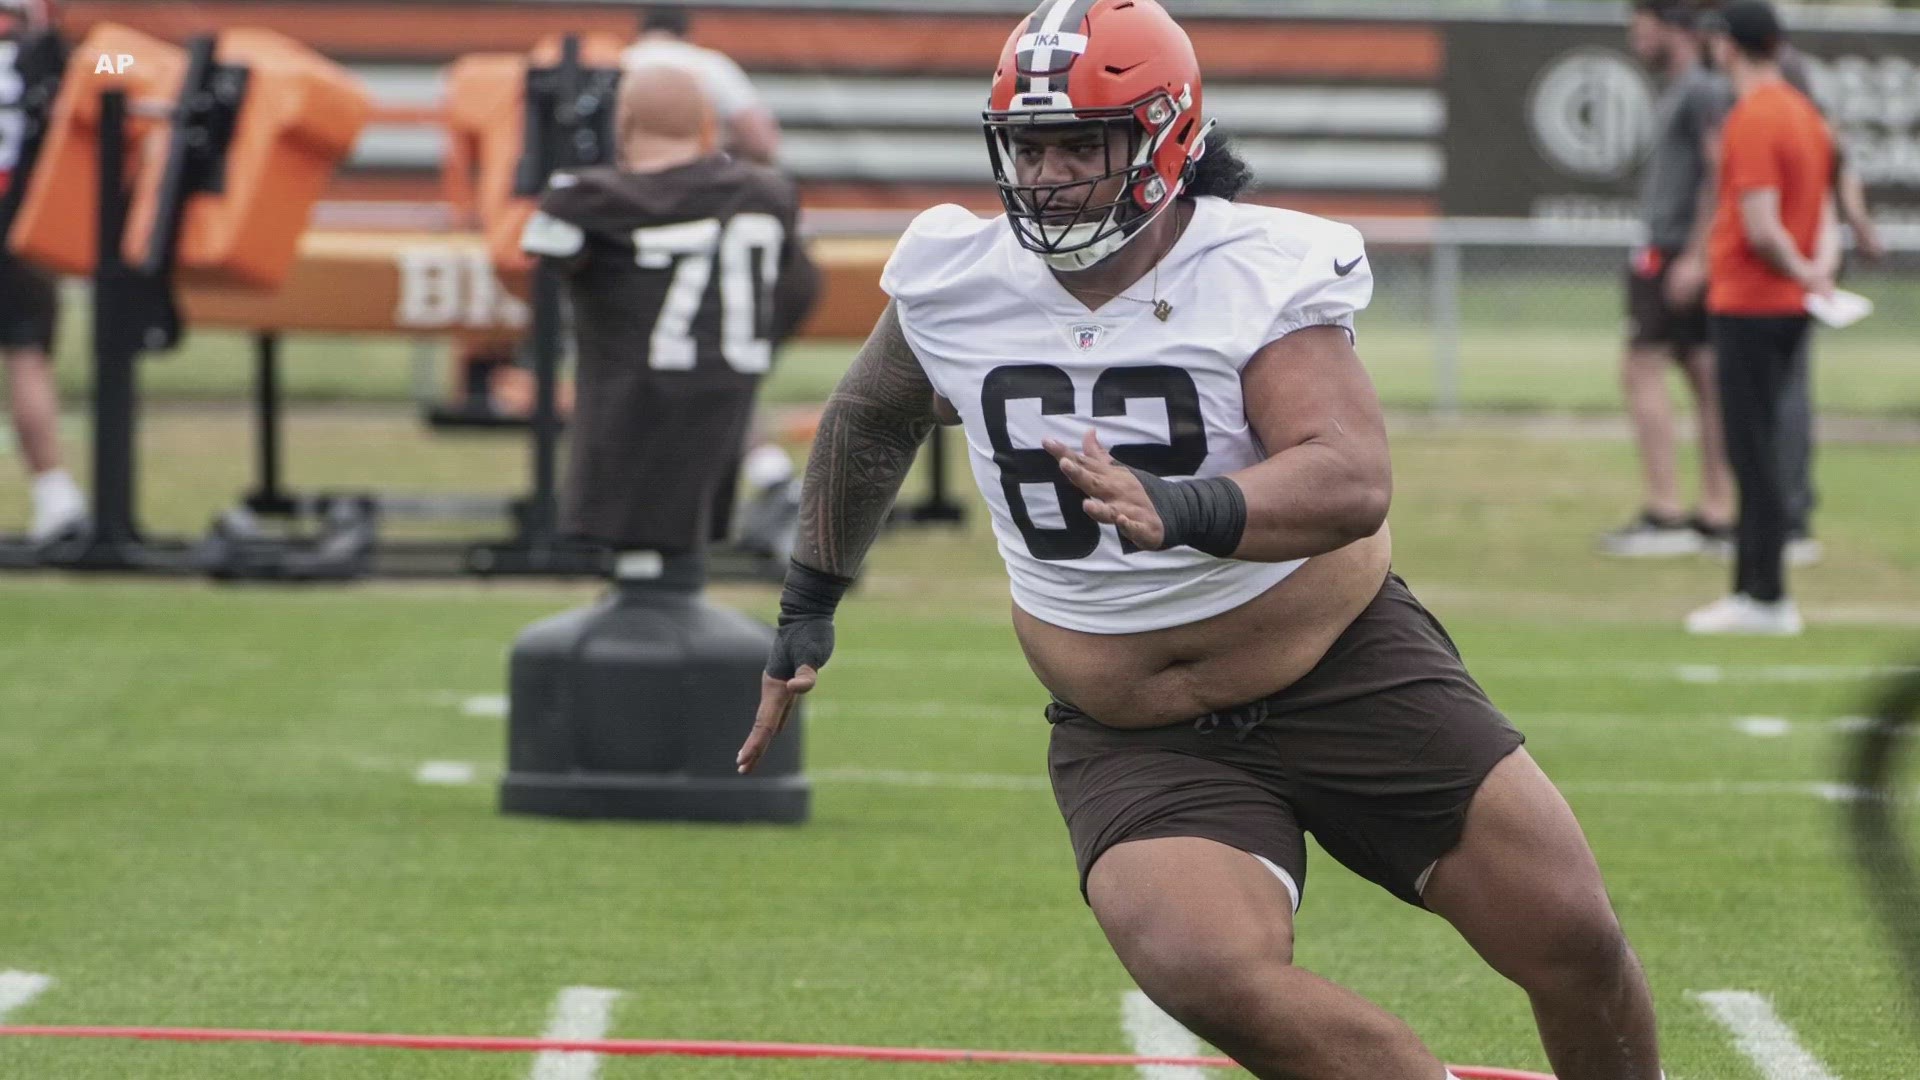 The former Baylor defensive tackle is learning a new scheme during his first week at minicamp with the Browns.